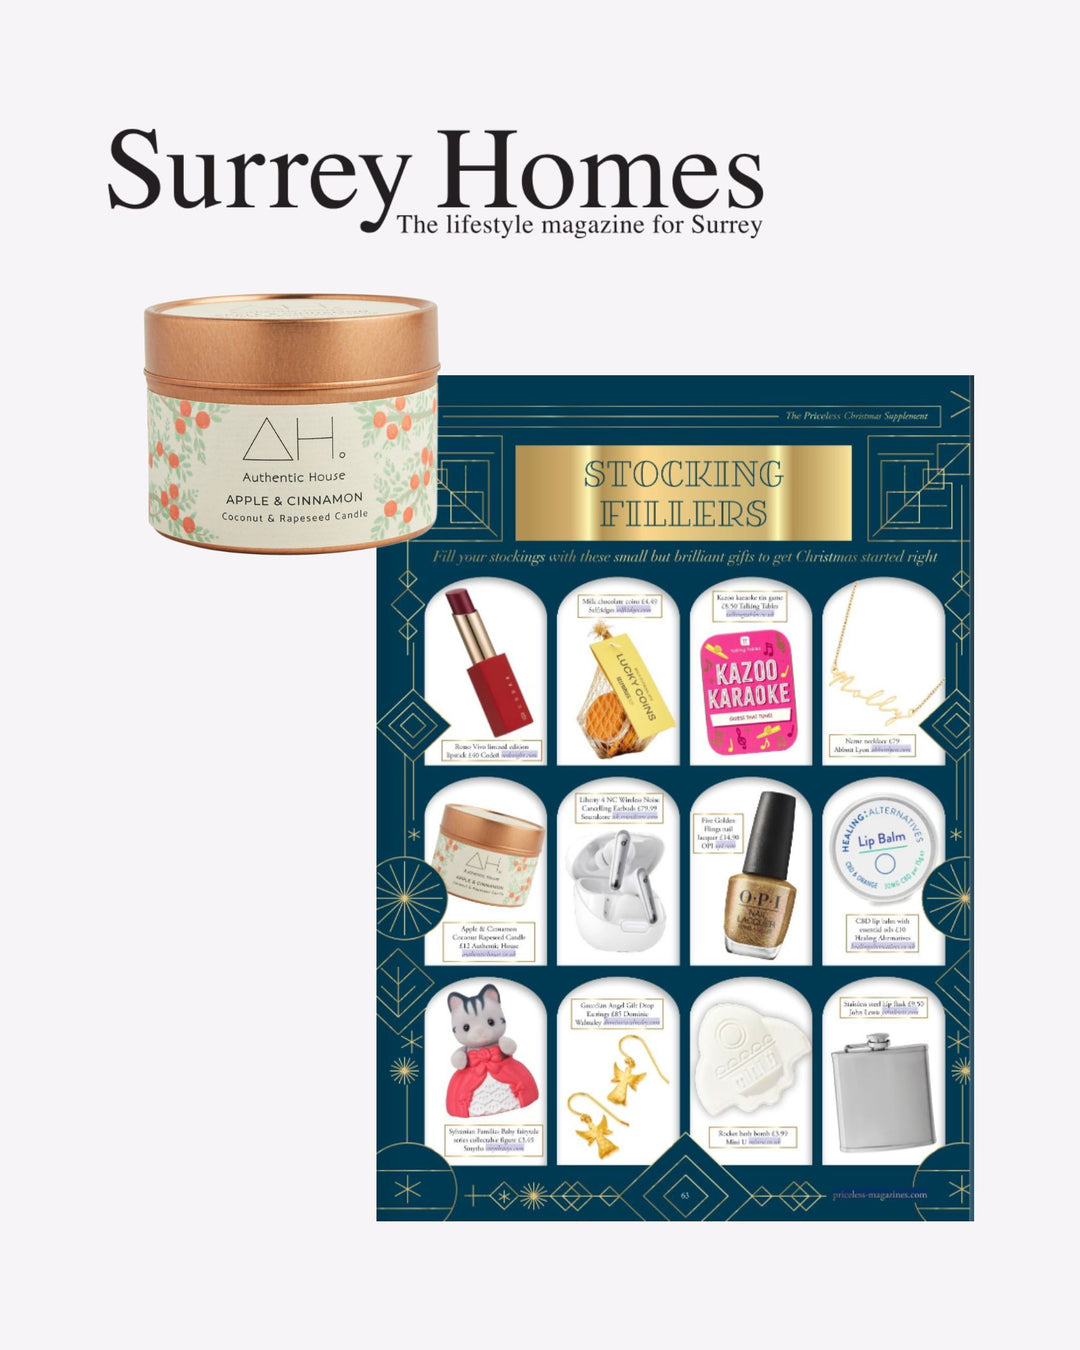 Featured in the Surrey Homes Stocking Fillers Gift Guide